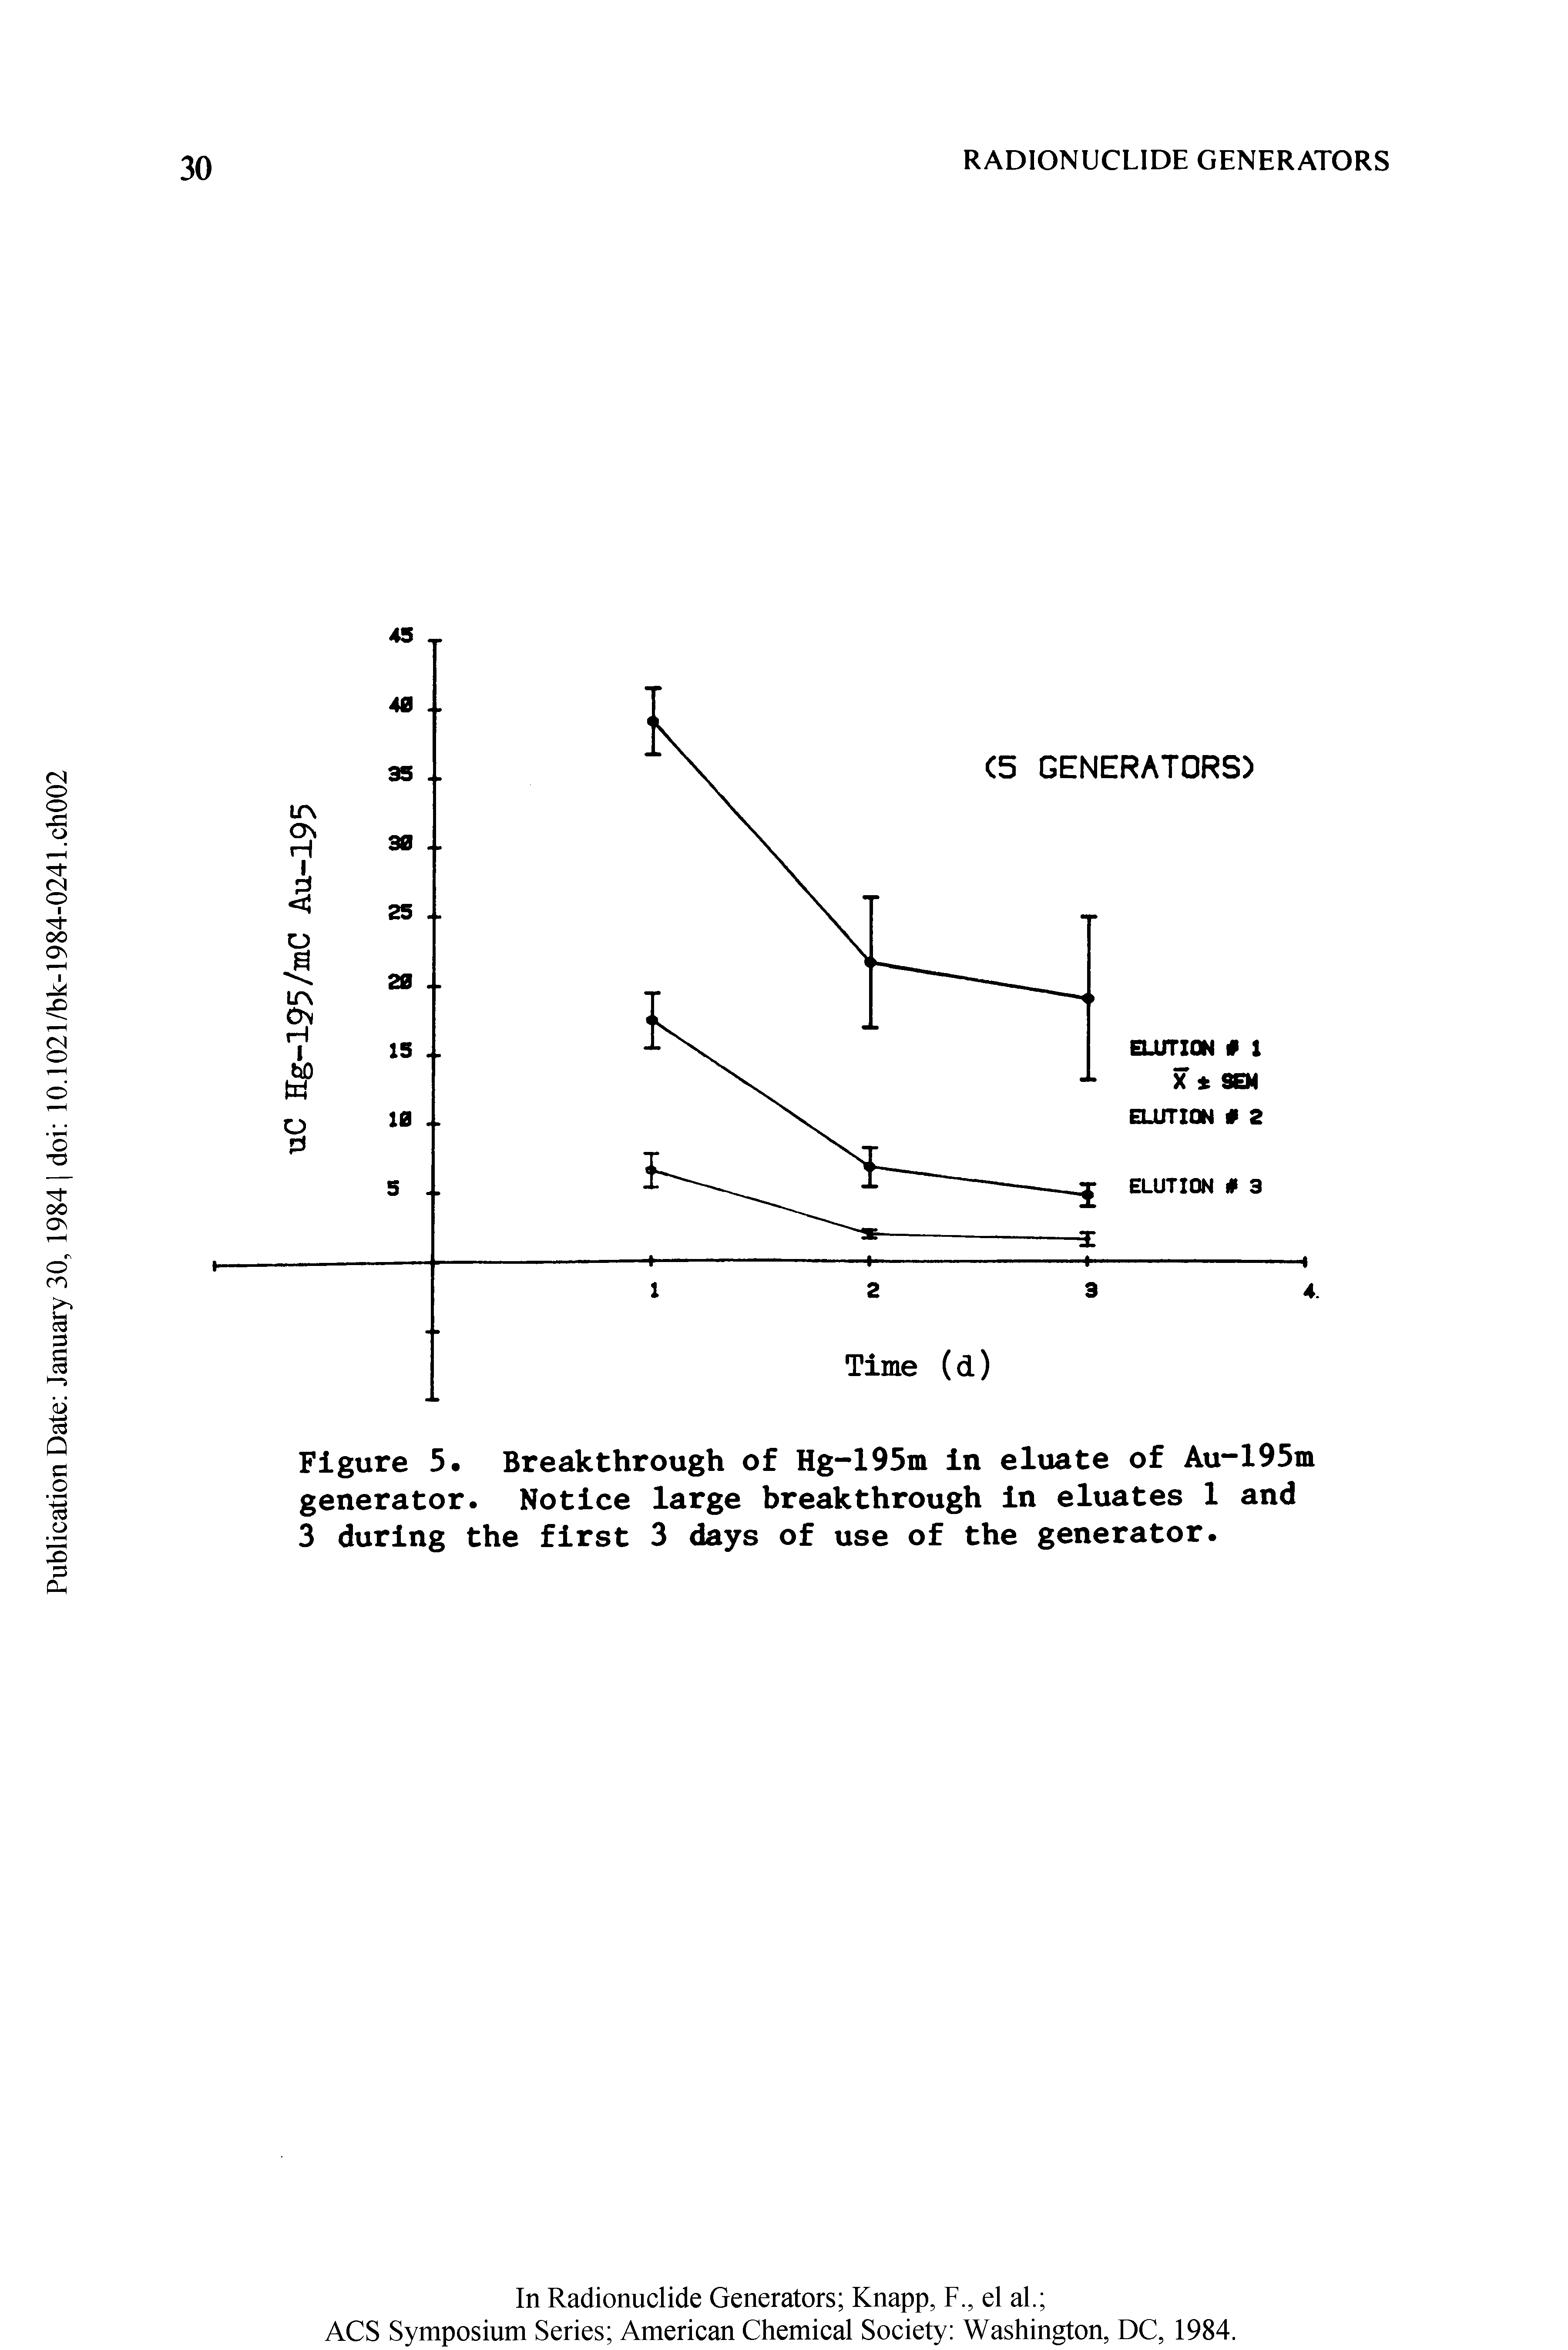 Figure 5. Breakthrough of Hg-195m in eluate of Au-195m generator. Notice large breakthrough in eluates 1 and 3 during the first 3 days of use of the generator.